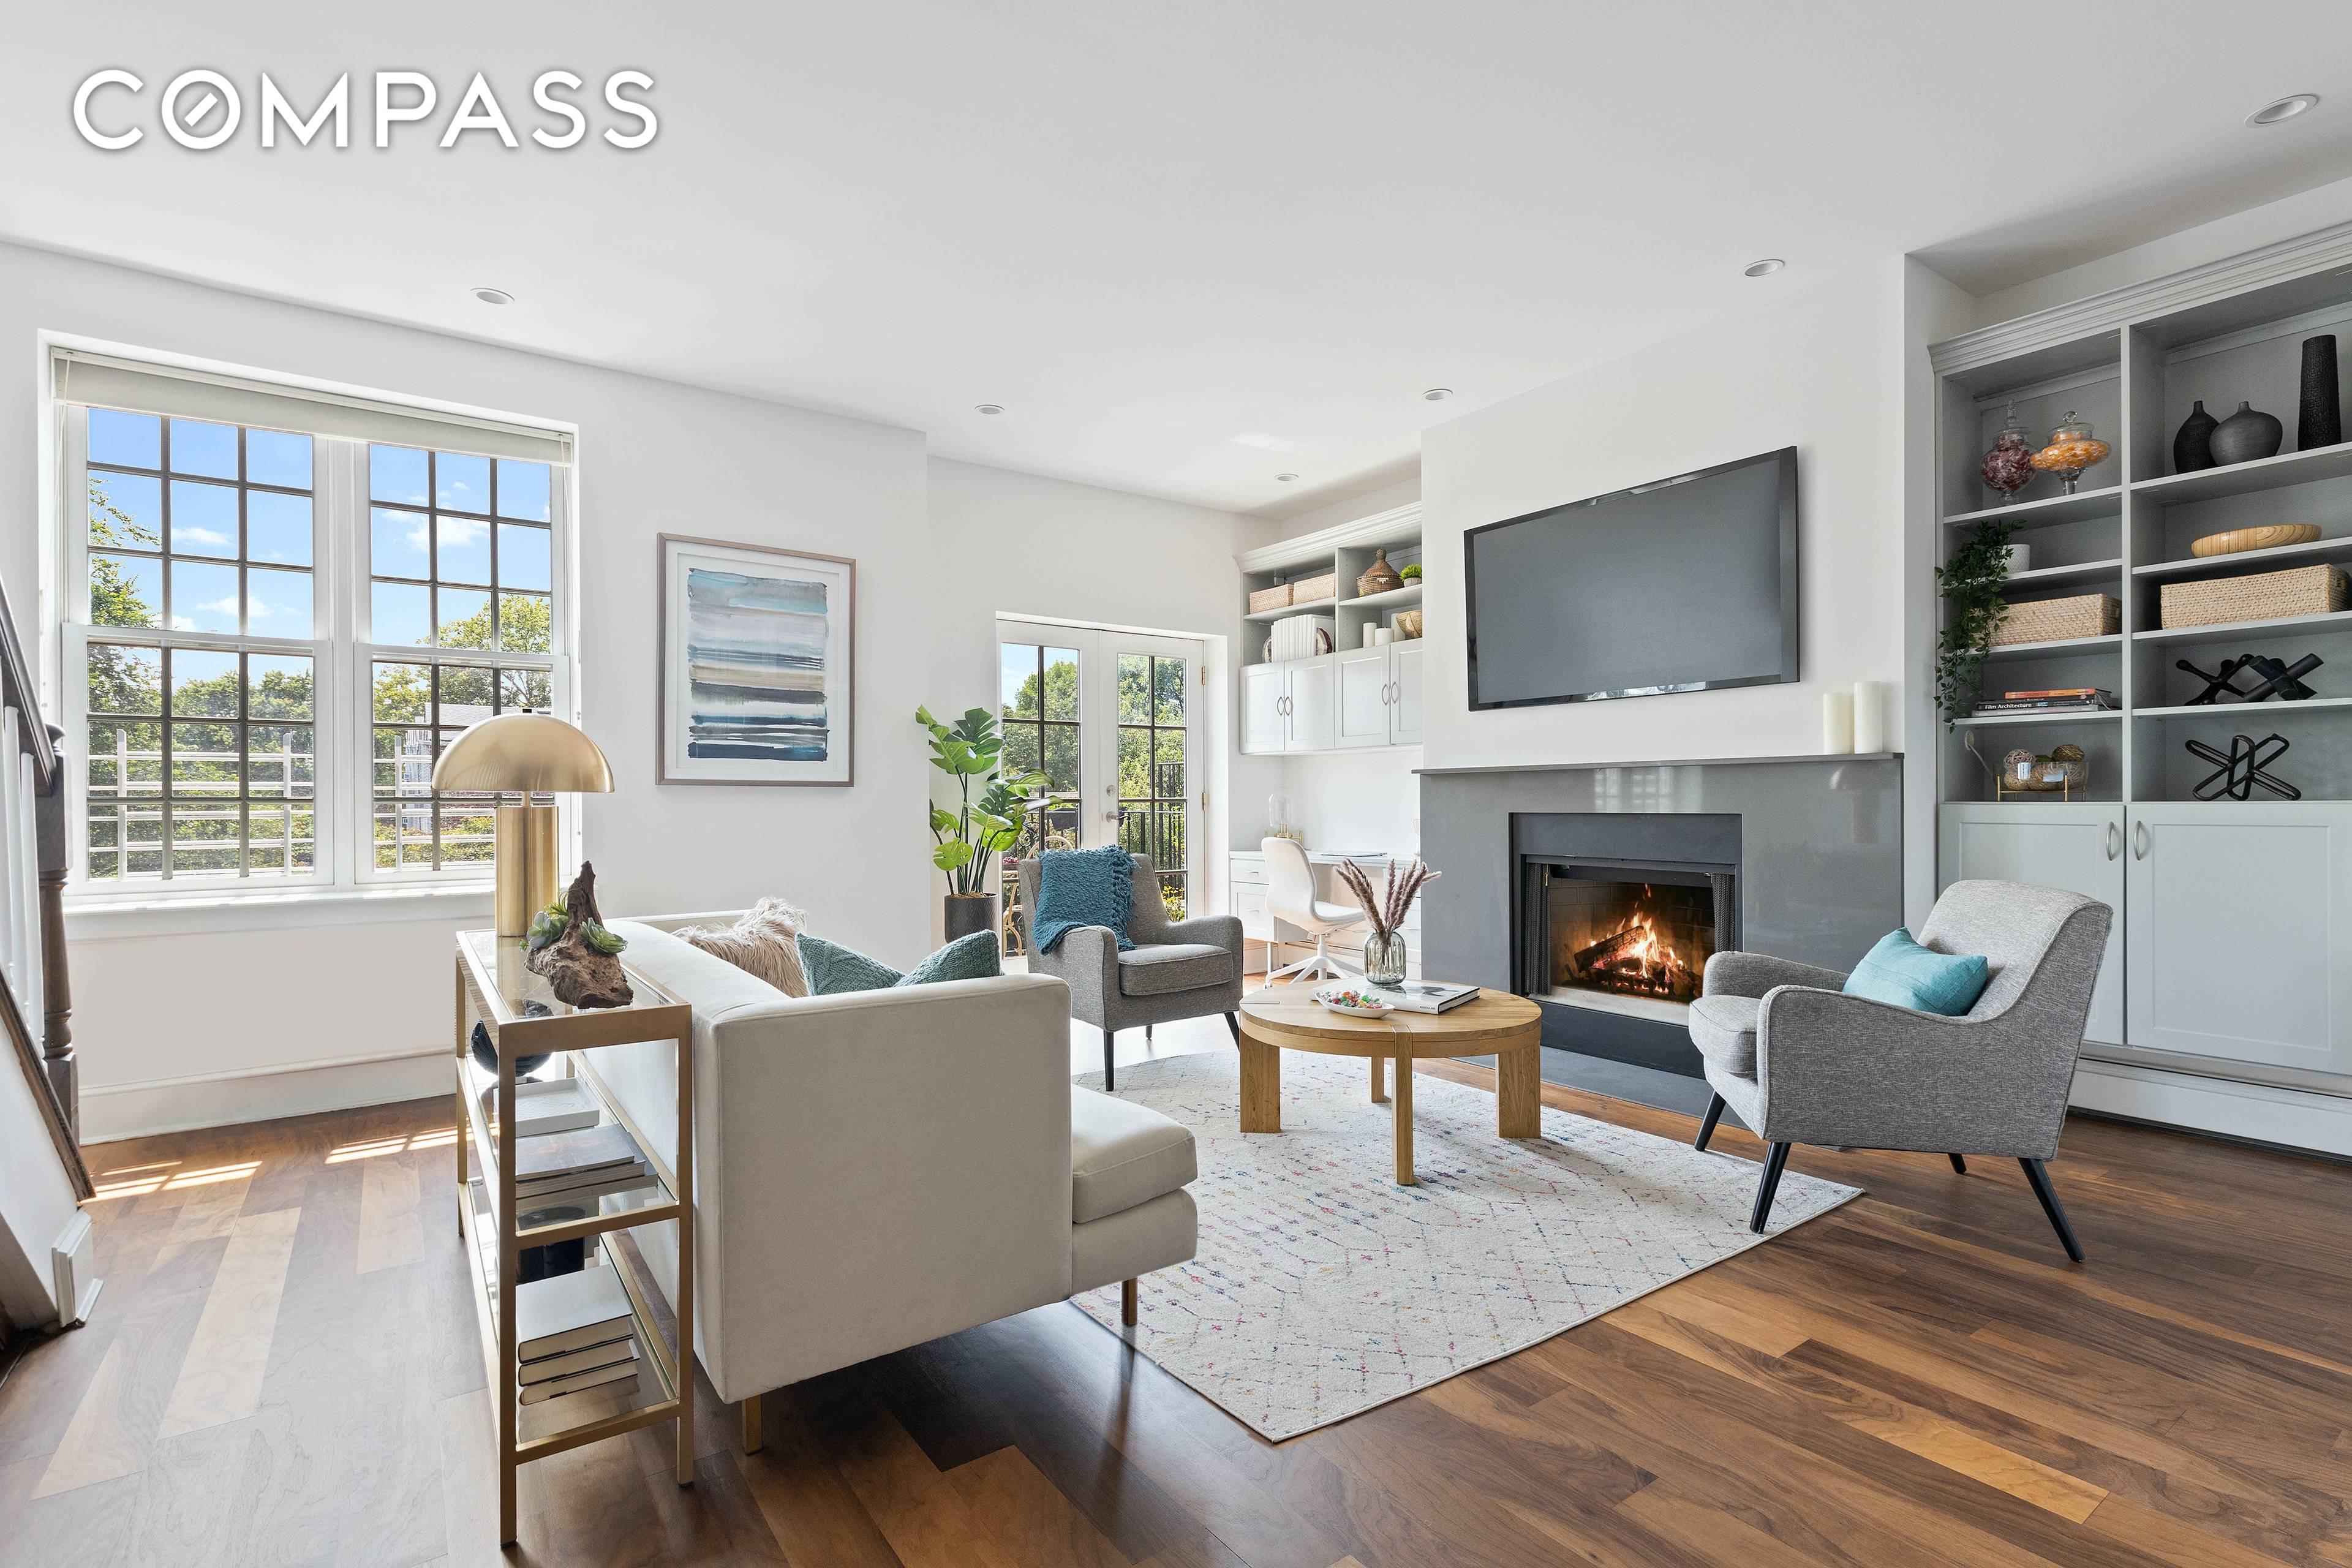 Welcome to this bright and spacious two bedroom condo where space and charm come together to create a lovely home in family friendly Windsor Terrace with its laid back vibe.